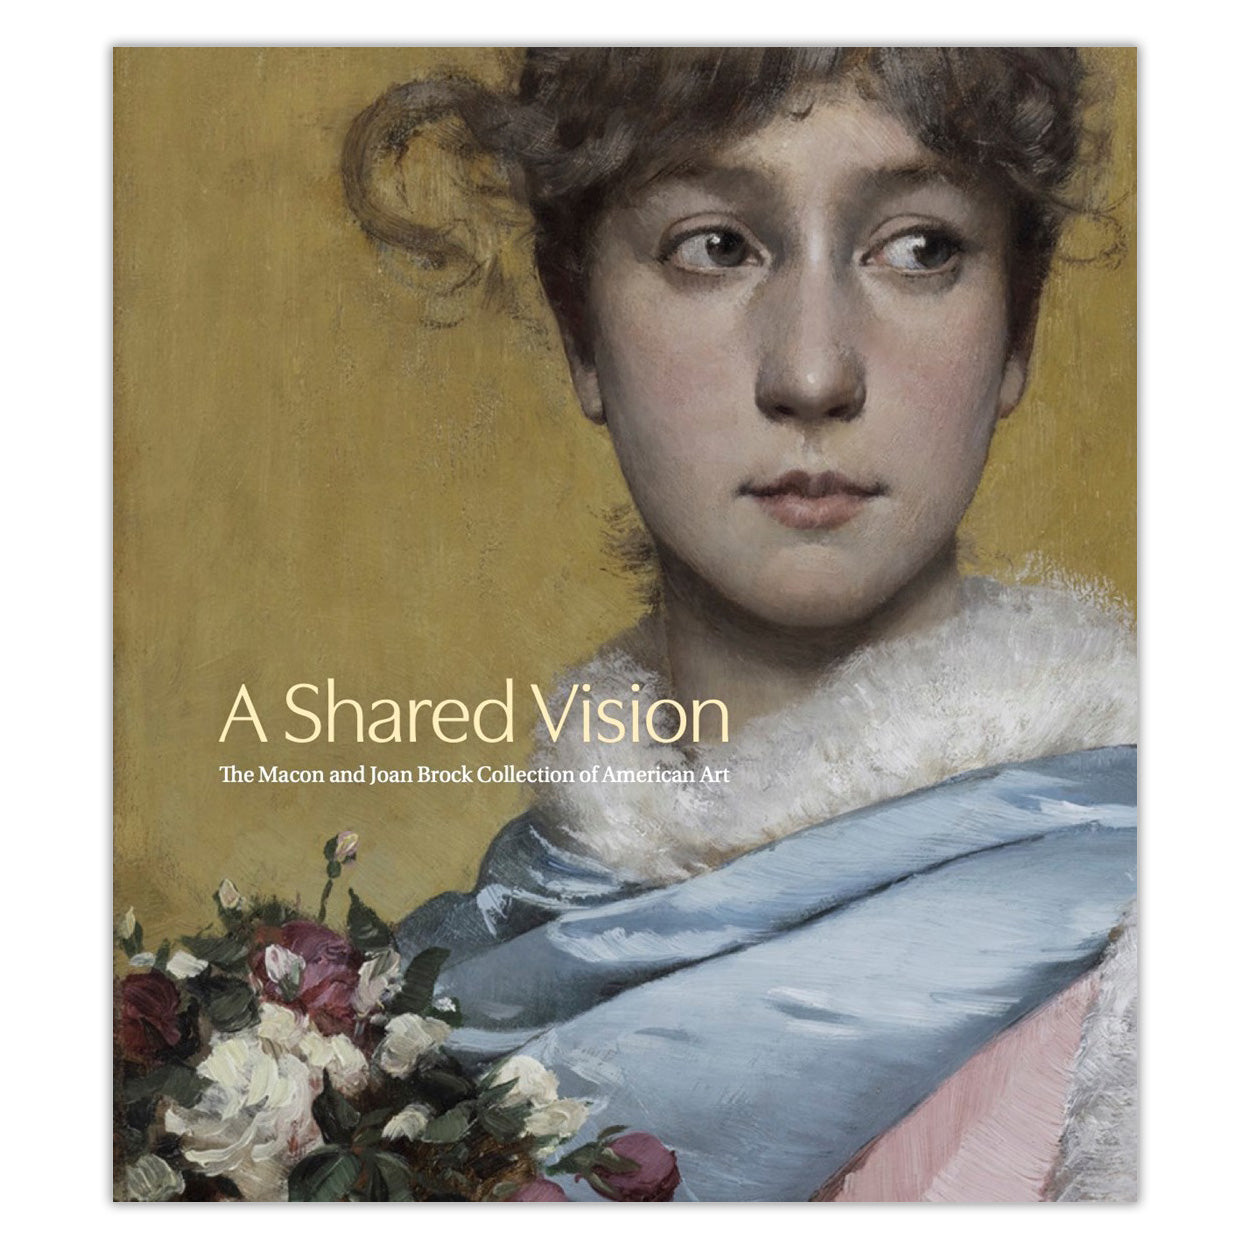 A Shared Vision: The Macon and Joan Brock Collection of American Art - Chrysler Museum of Art Shop